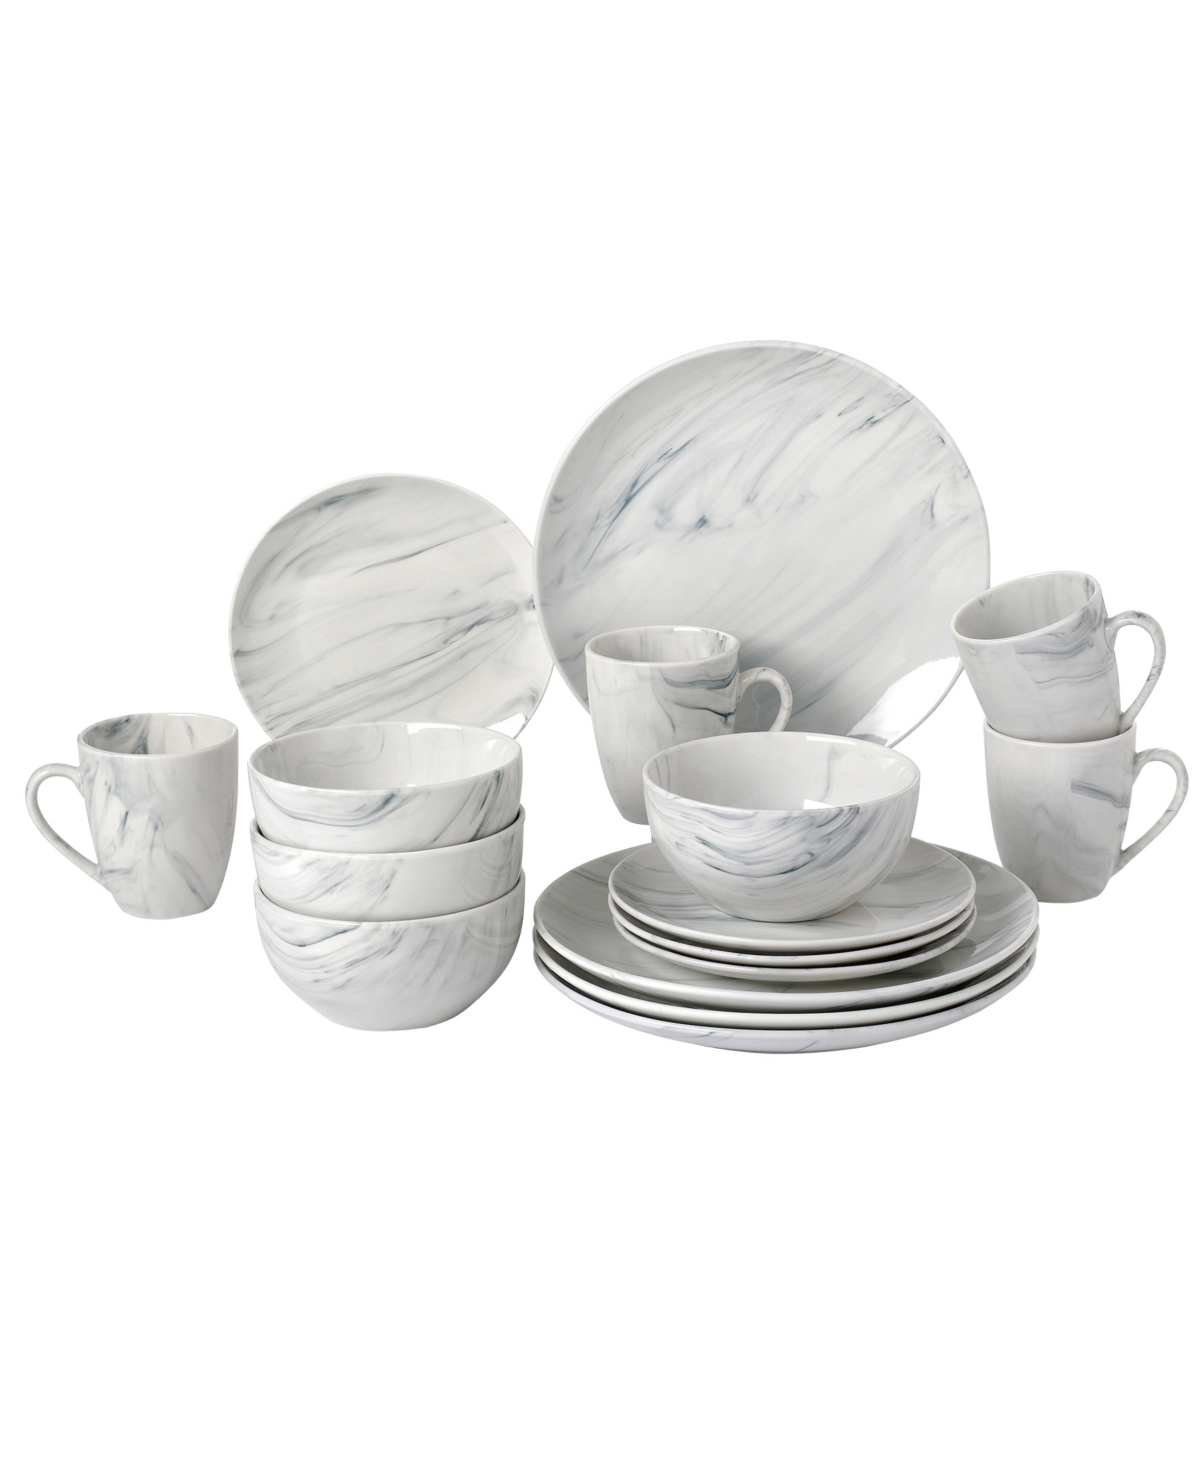 Marble 16 Piece Service for 4 Dinnerware Set - Gray